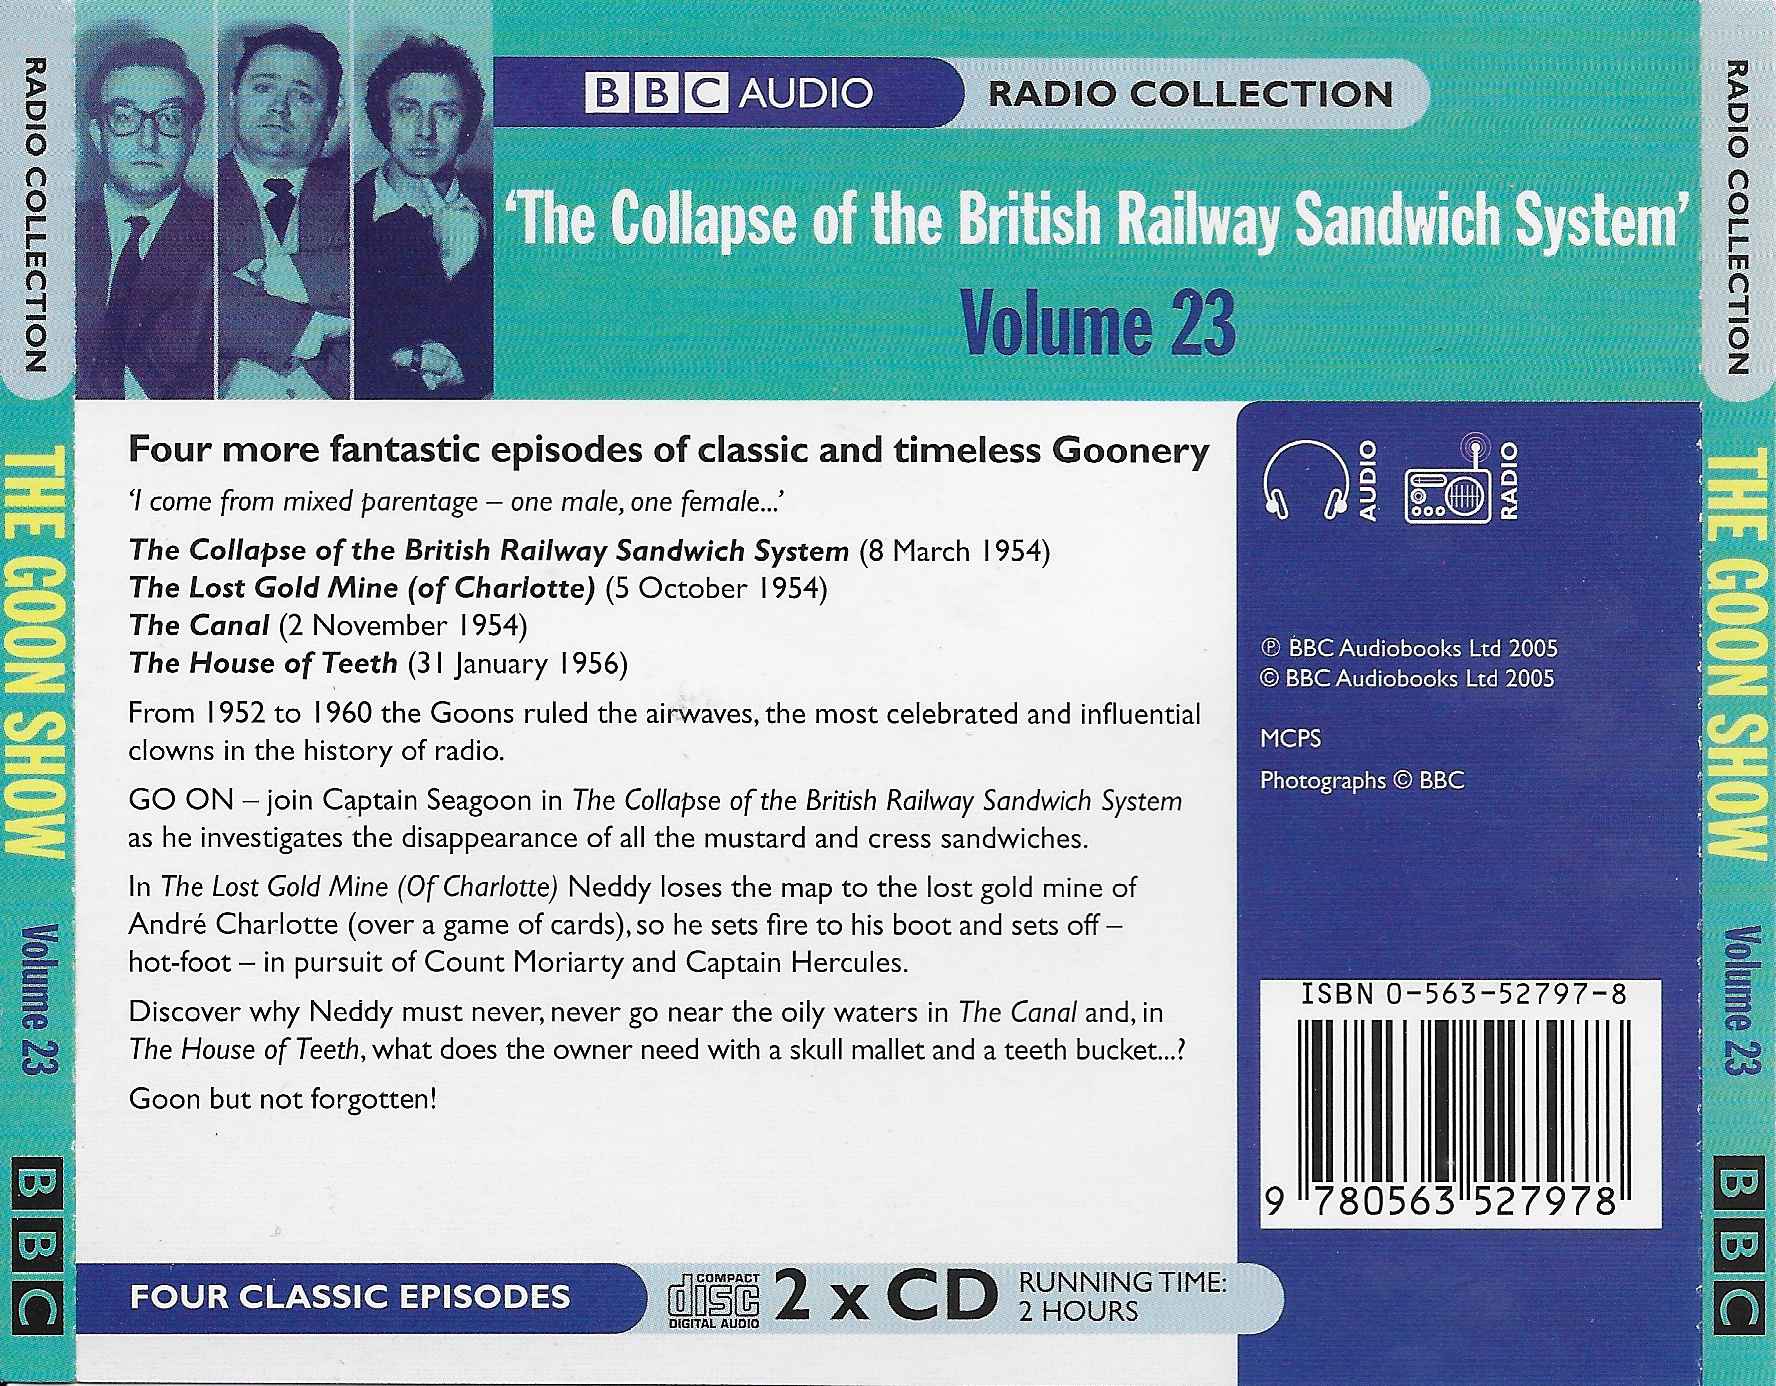 Picture of ISBN 0-563-52797-8 The Goon show 23 - The collapse of the British Railway sandwich system by artist Spike Milligan from the BBC records and Tapes library